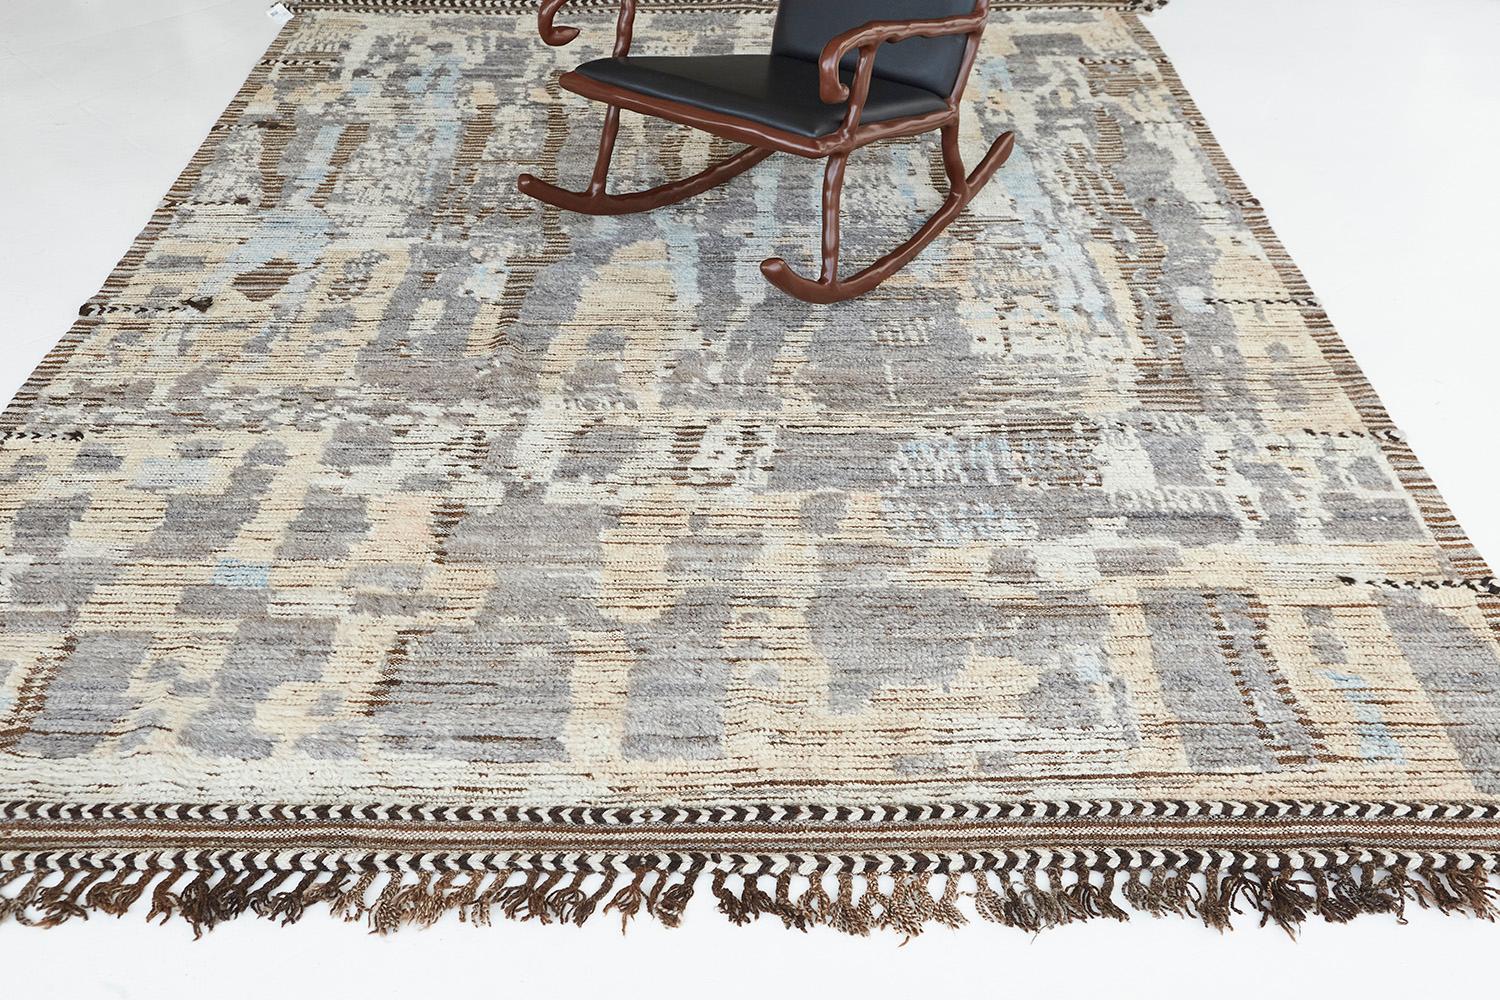 Halfah' is an earth-toned pile weave and modern-day interpretation of the Moroccan world. The rug's irregular shapes and strokes resemble the fibers of nature and their ability to be used for crafts such as cords and basketry. Designed in Los